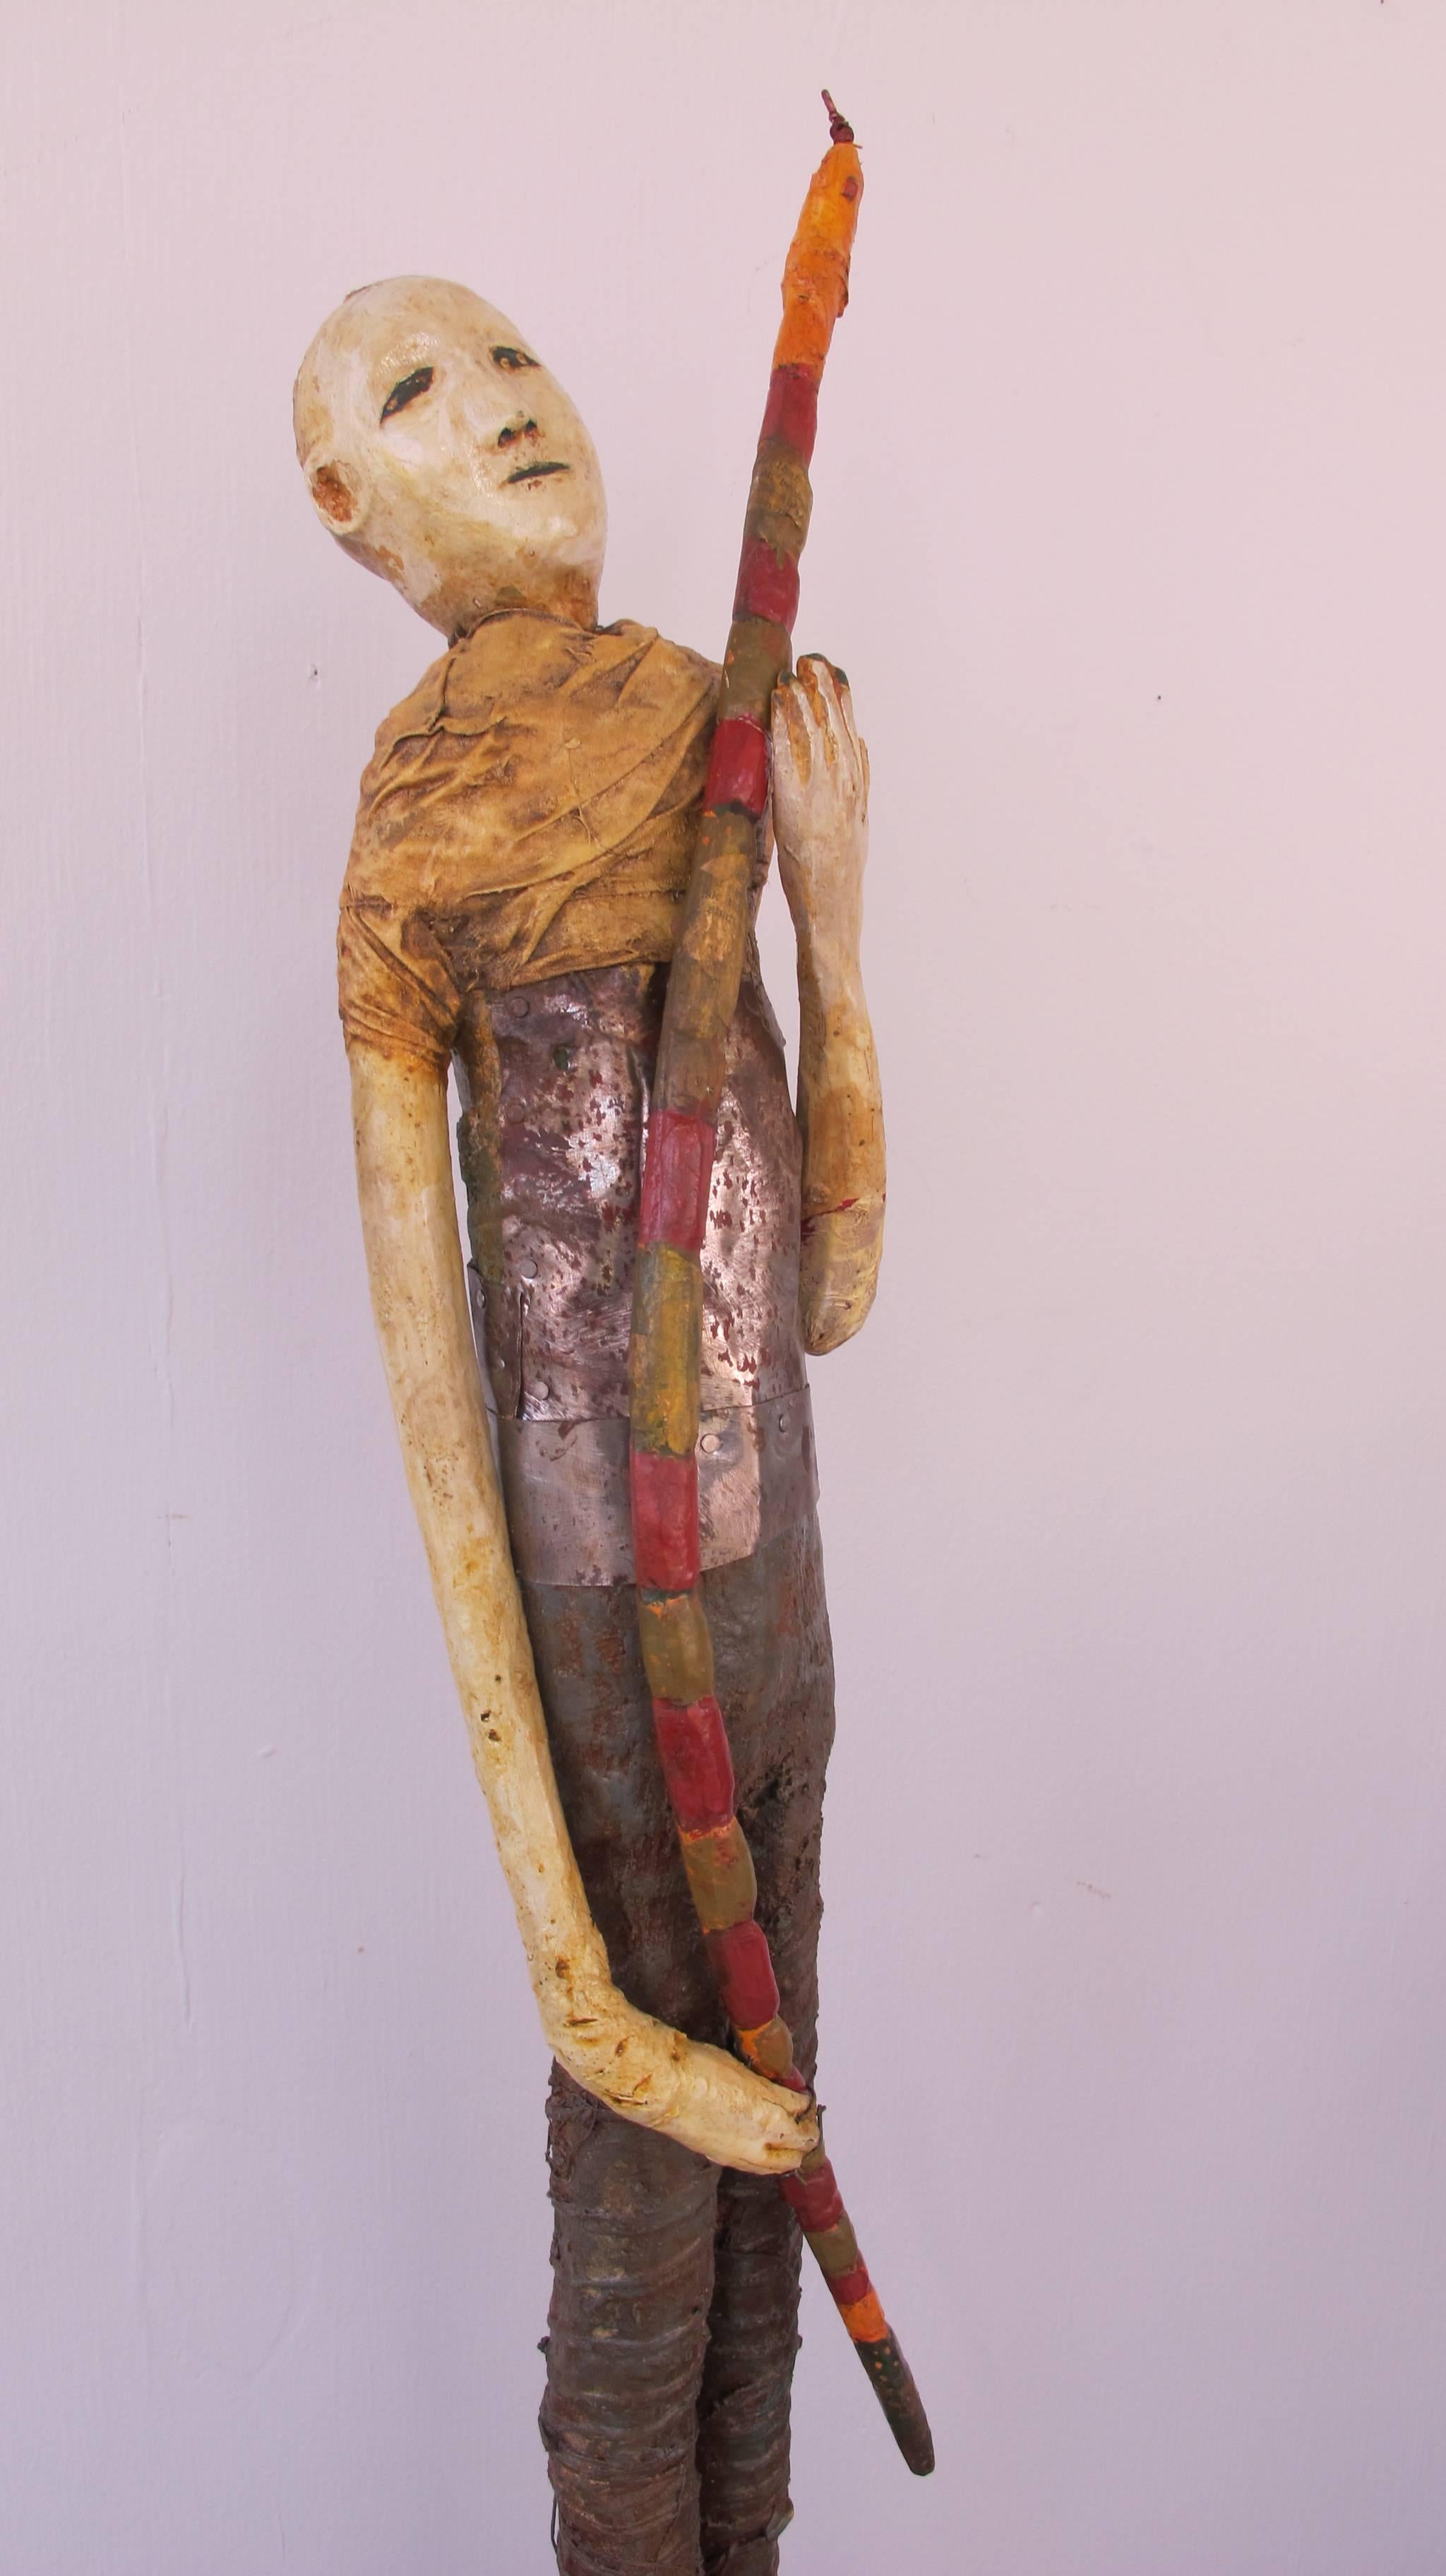 Self-taught artist Terry Turrell carved and painted wood and tin figure with cloth wrapping. The figure is holding a banded wood snake with a metal tongue.